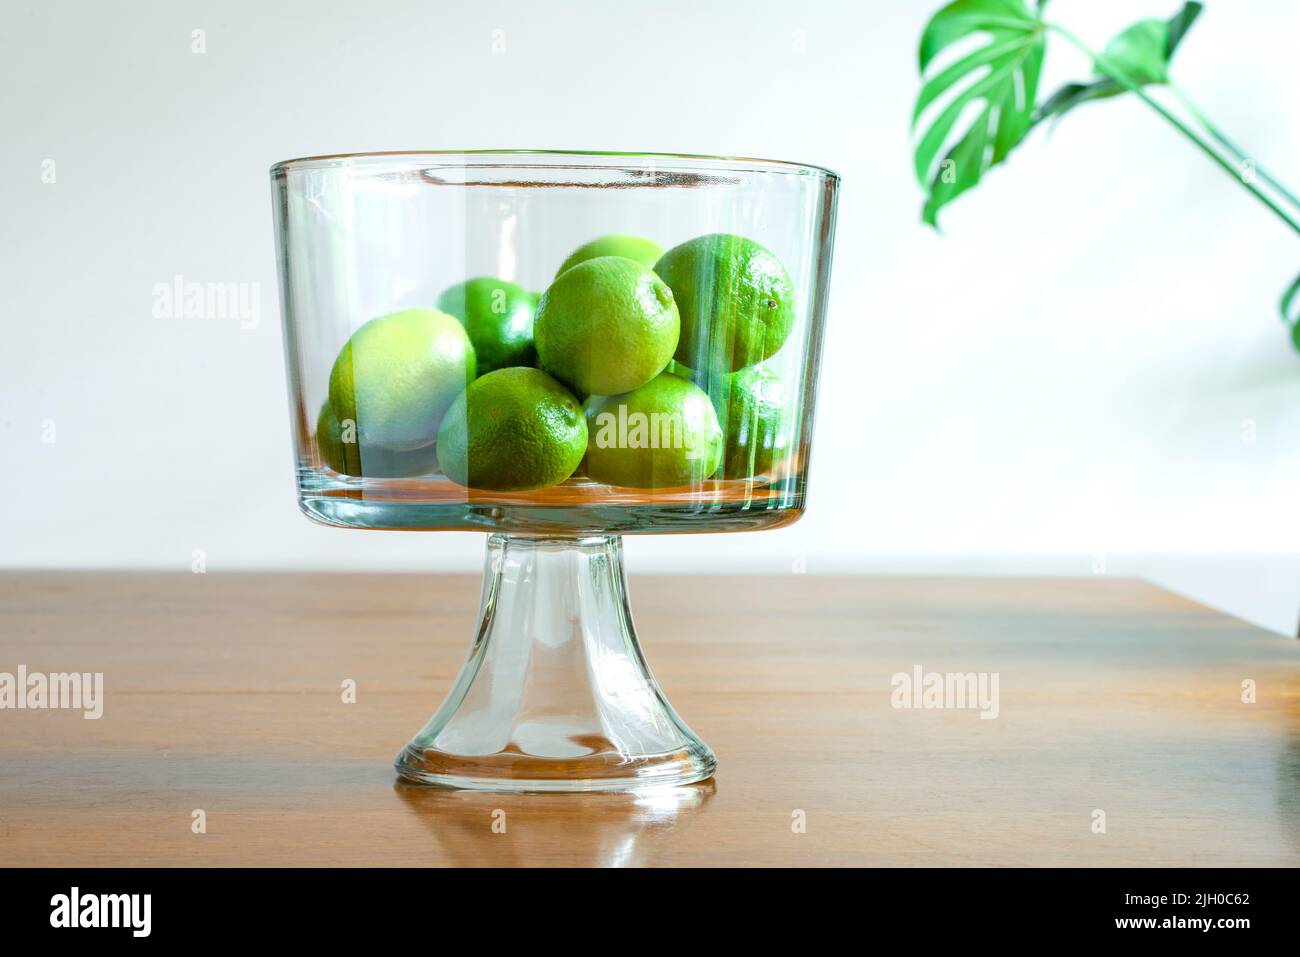 Green Apples in a Truffle Bowl Stock Photo